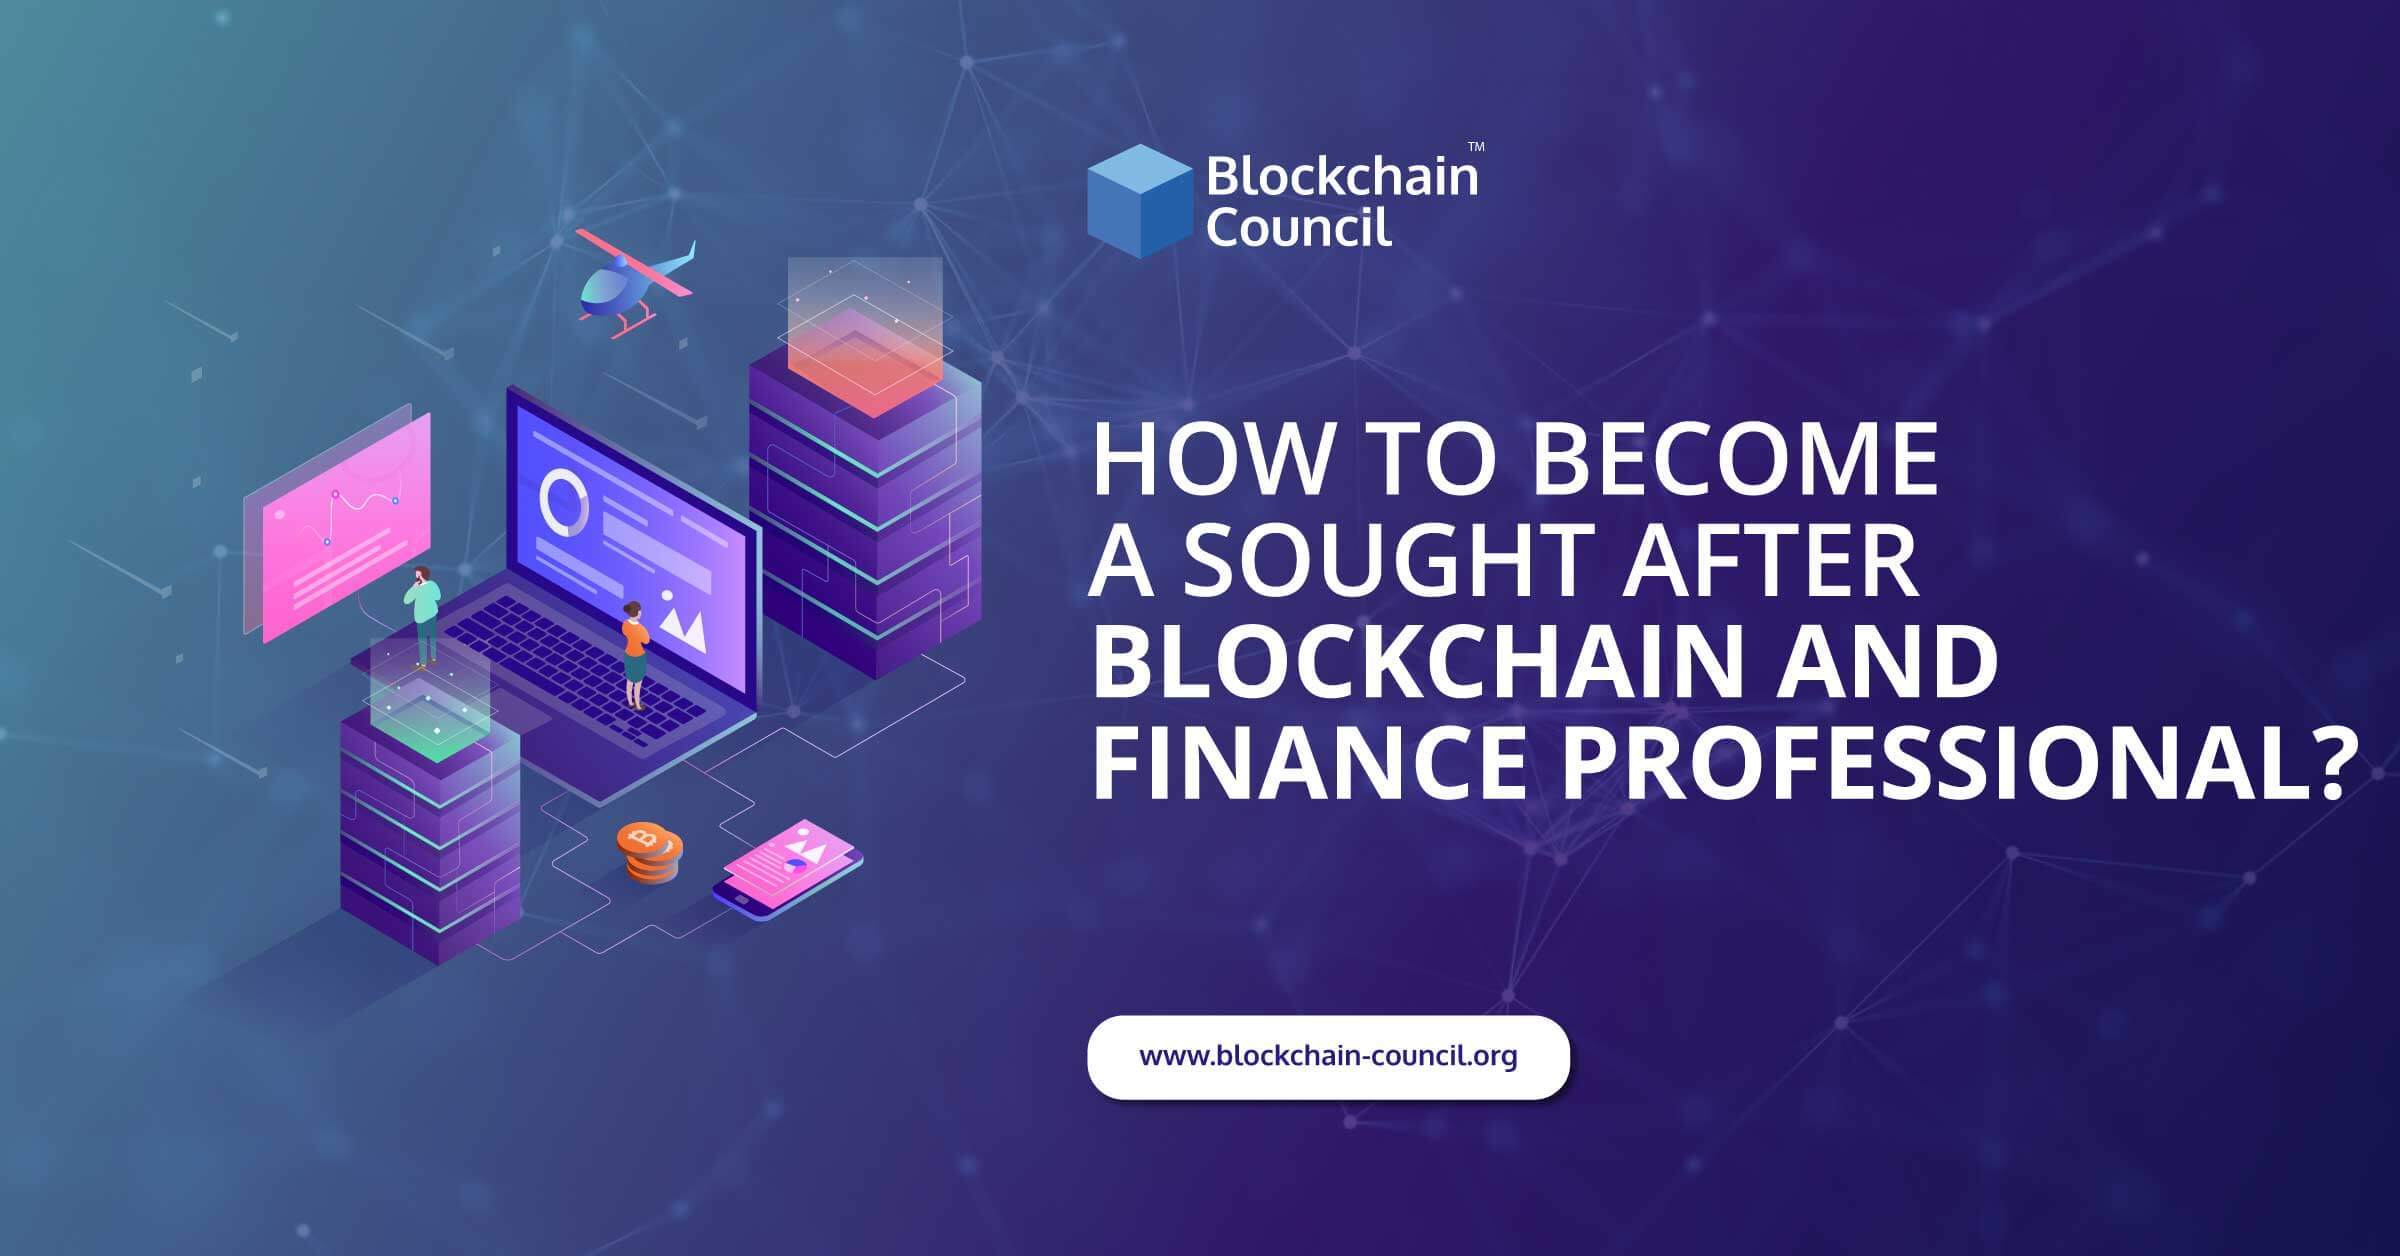 How To Become A Sought After Blockchain And Finance Professional?